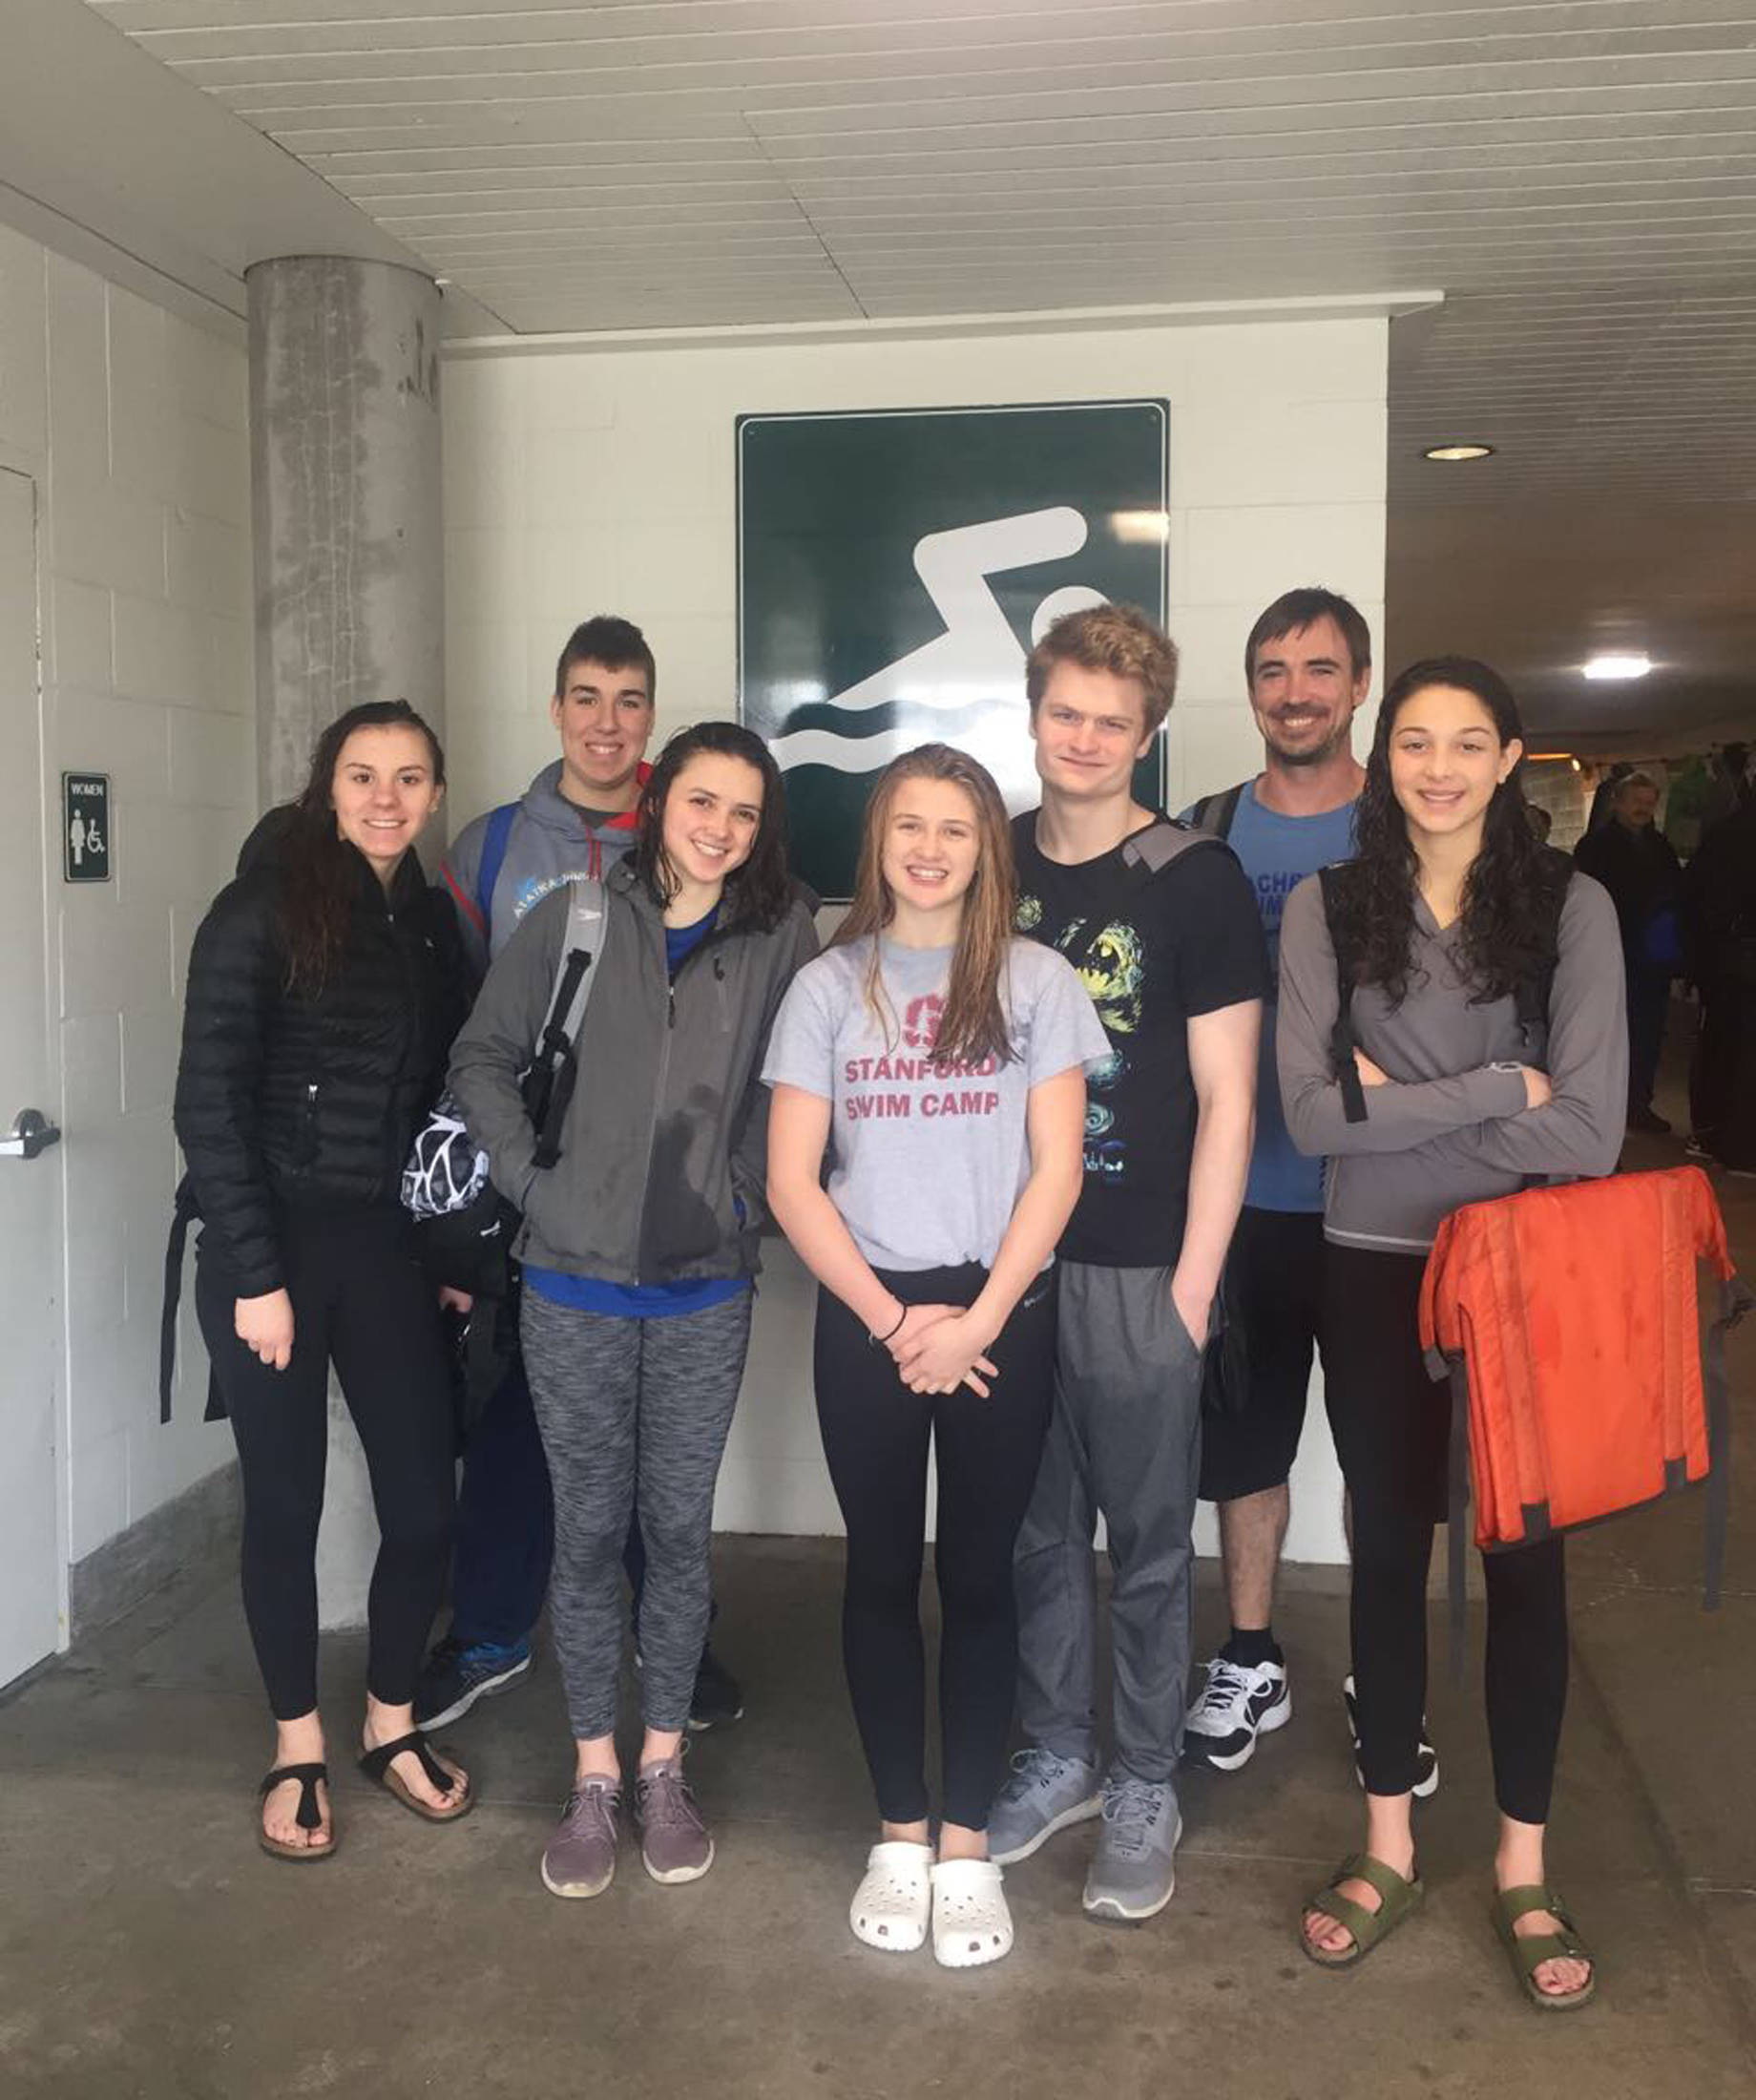 Photo by Britt Milne From left to right: Kira Milne, Jake Nelson, Ella Blanton-Yourkowski, Adeline Berry, Clayton Arndt, Coach Thad Gunther and Madison Story stand in front of the aquatic complex Beaverton, Oregon on Sunday, March 4.